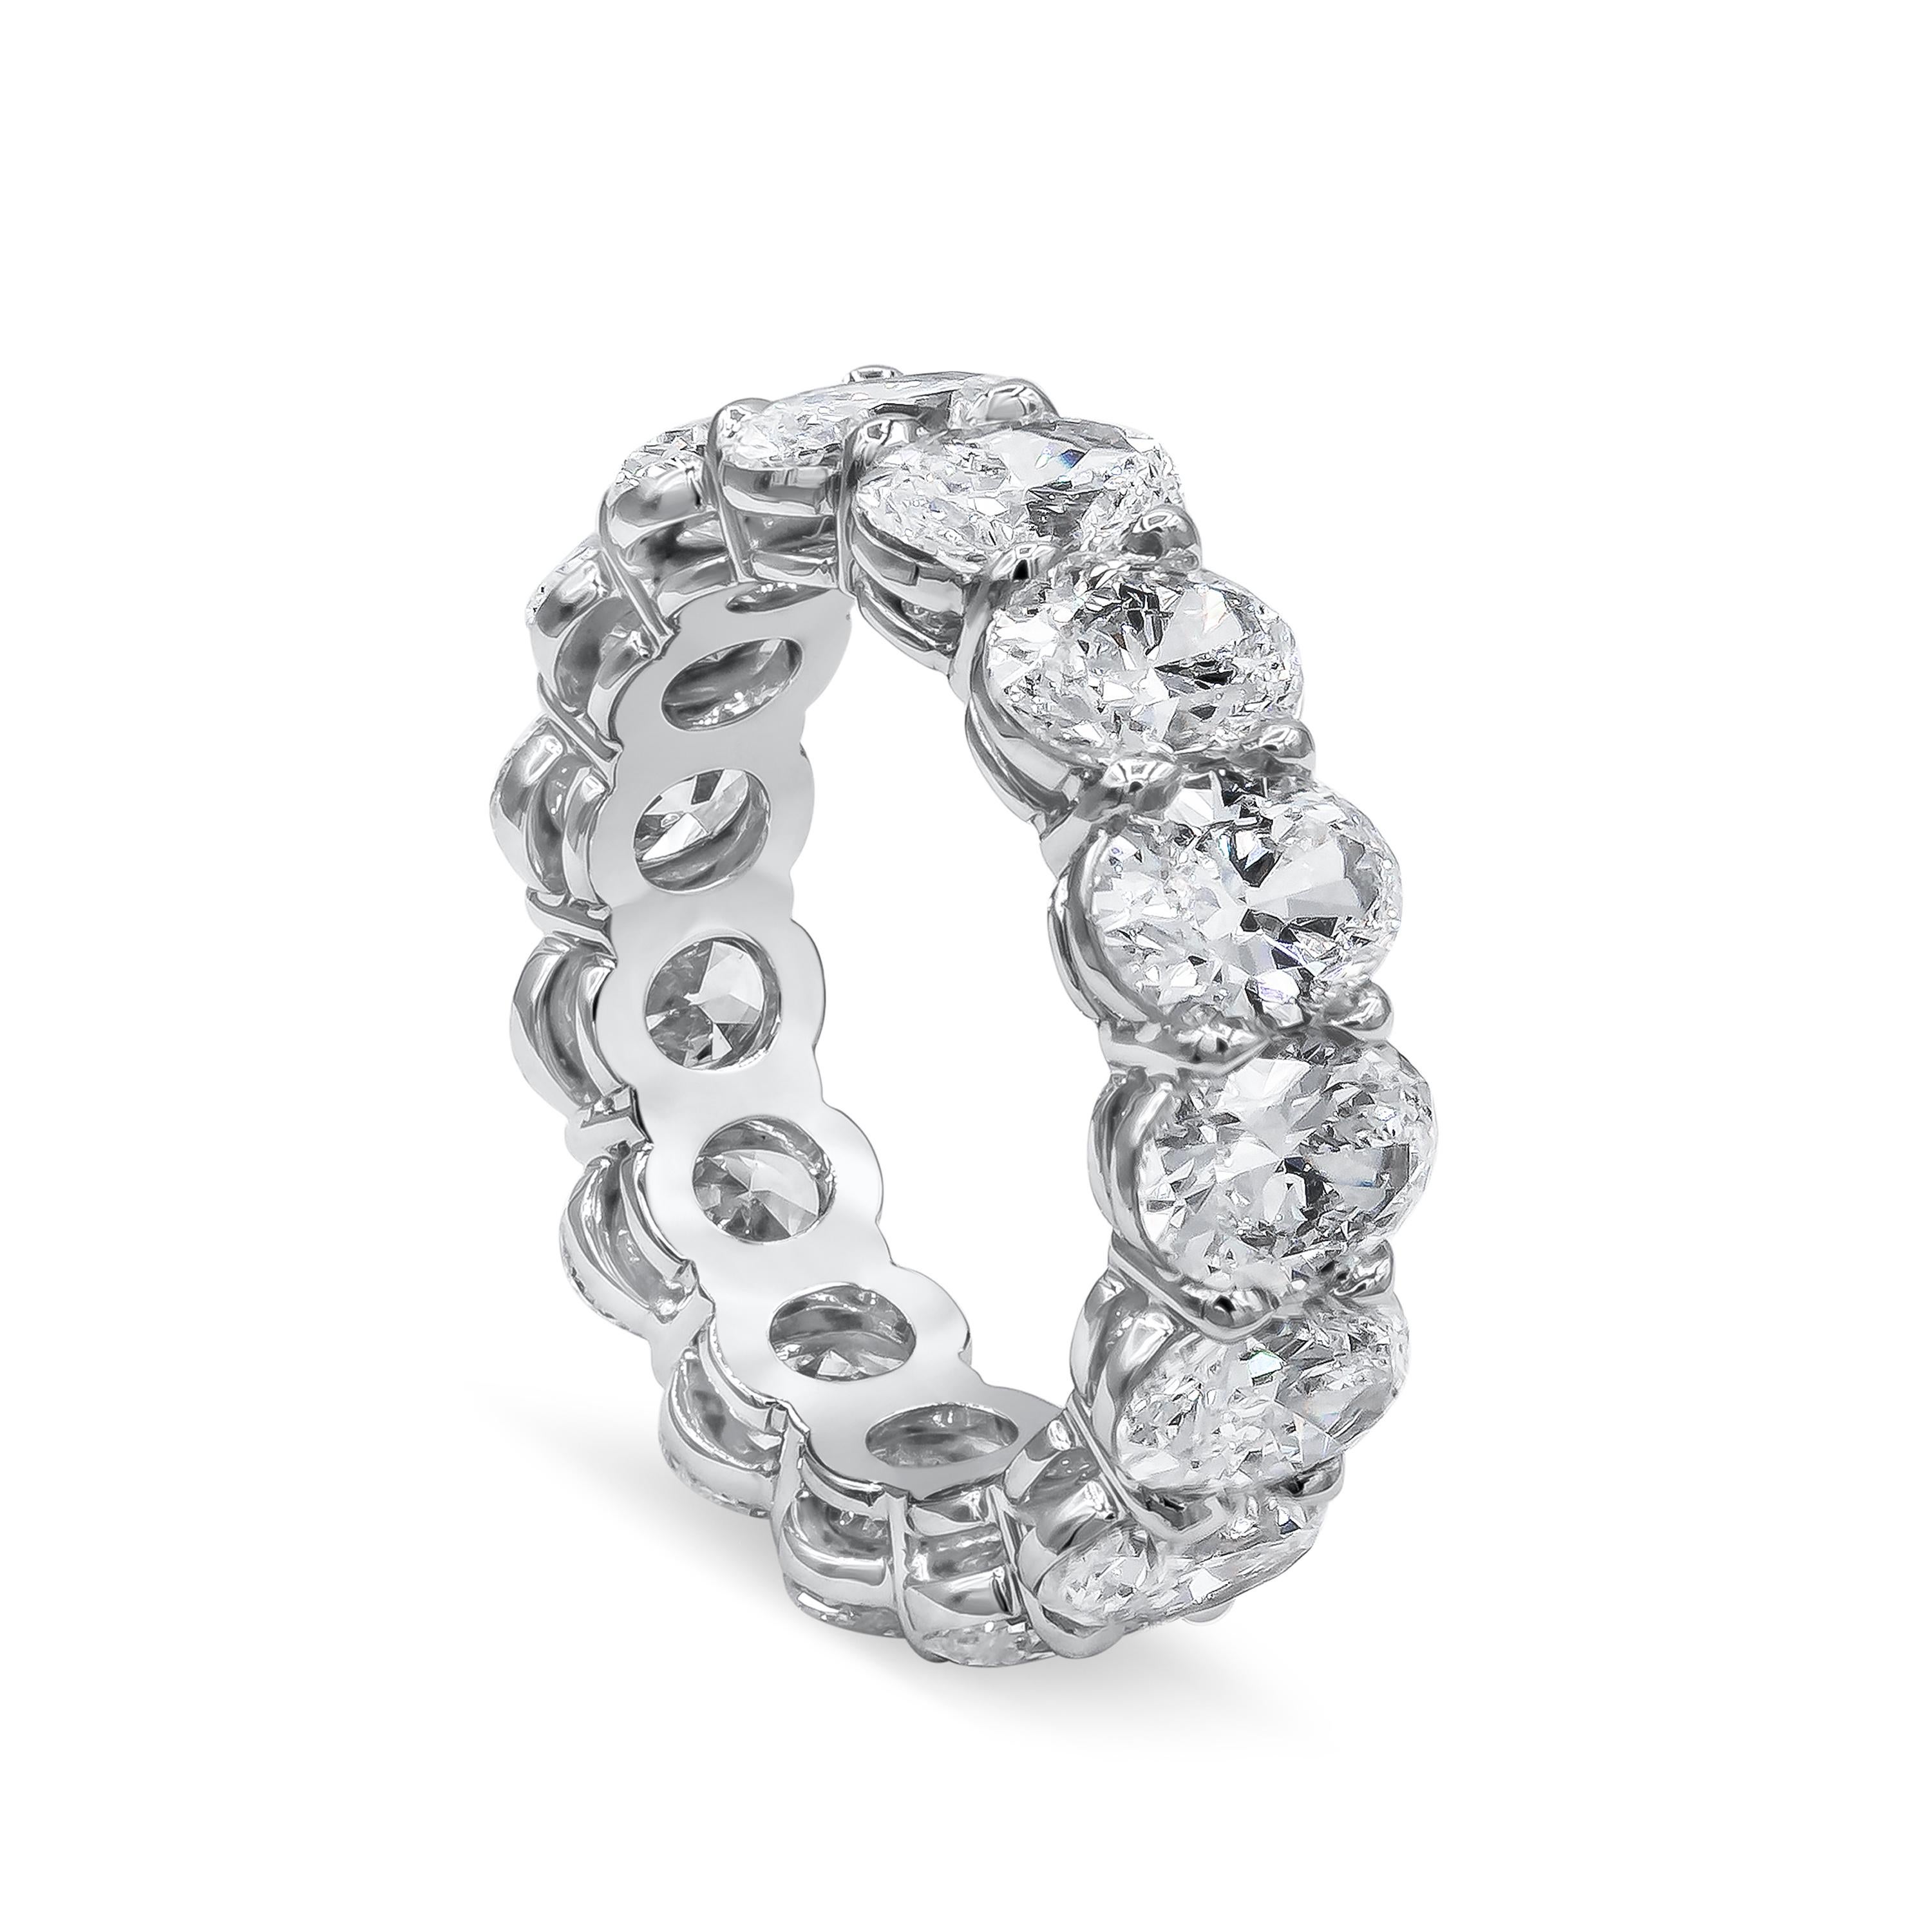 A brilliant eternity wedding band showcasing oval cut diamonds set in a shared prong, platinum mounting. Diamonds weigh 7.50 carats total. Each diamond is GIA certified as E-F color, SI clarity. Size 6 US.

Style available in different price ranges.